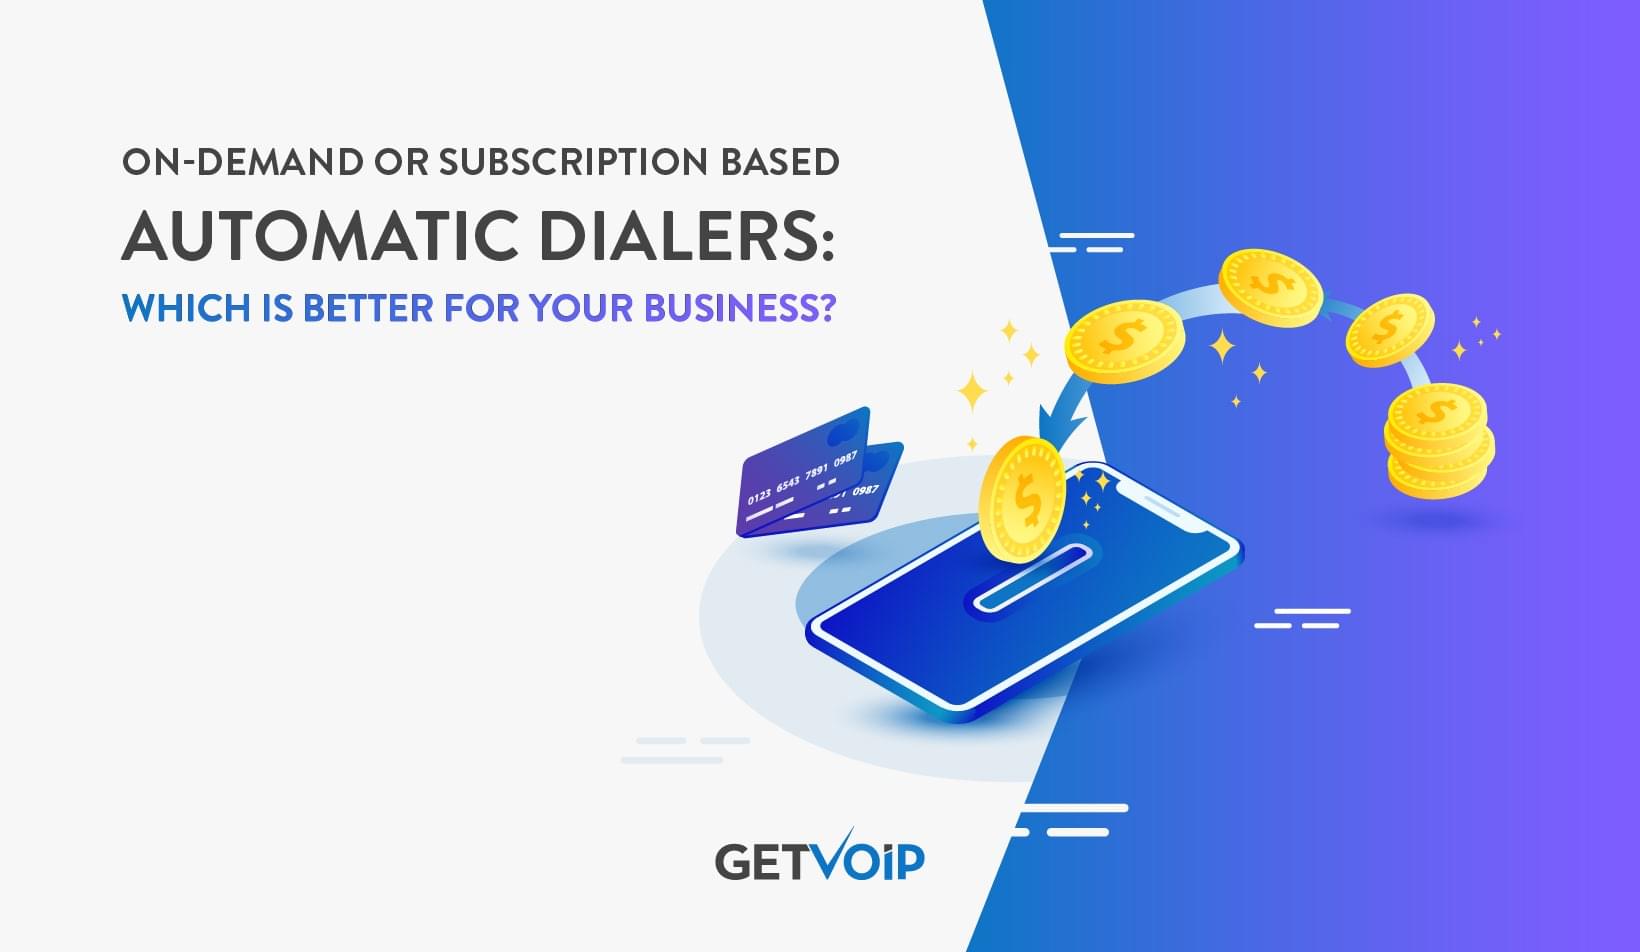 On-Demand or Subscription Based Automatic Dialers: Which is Better For Your Business?